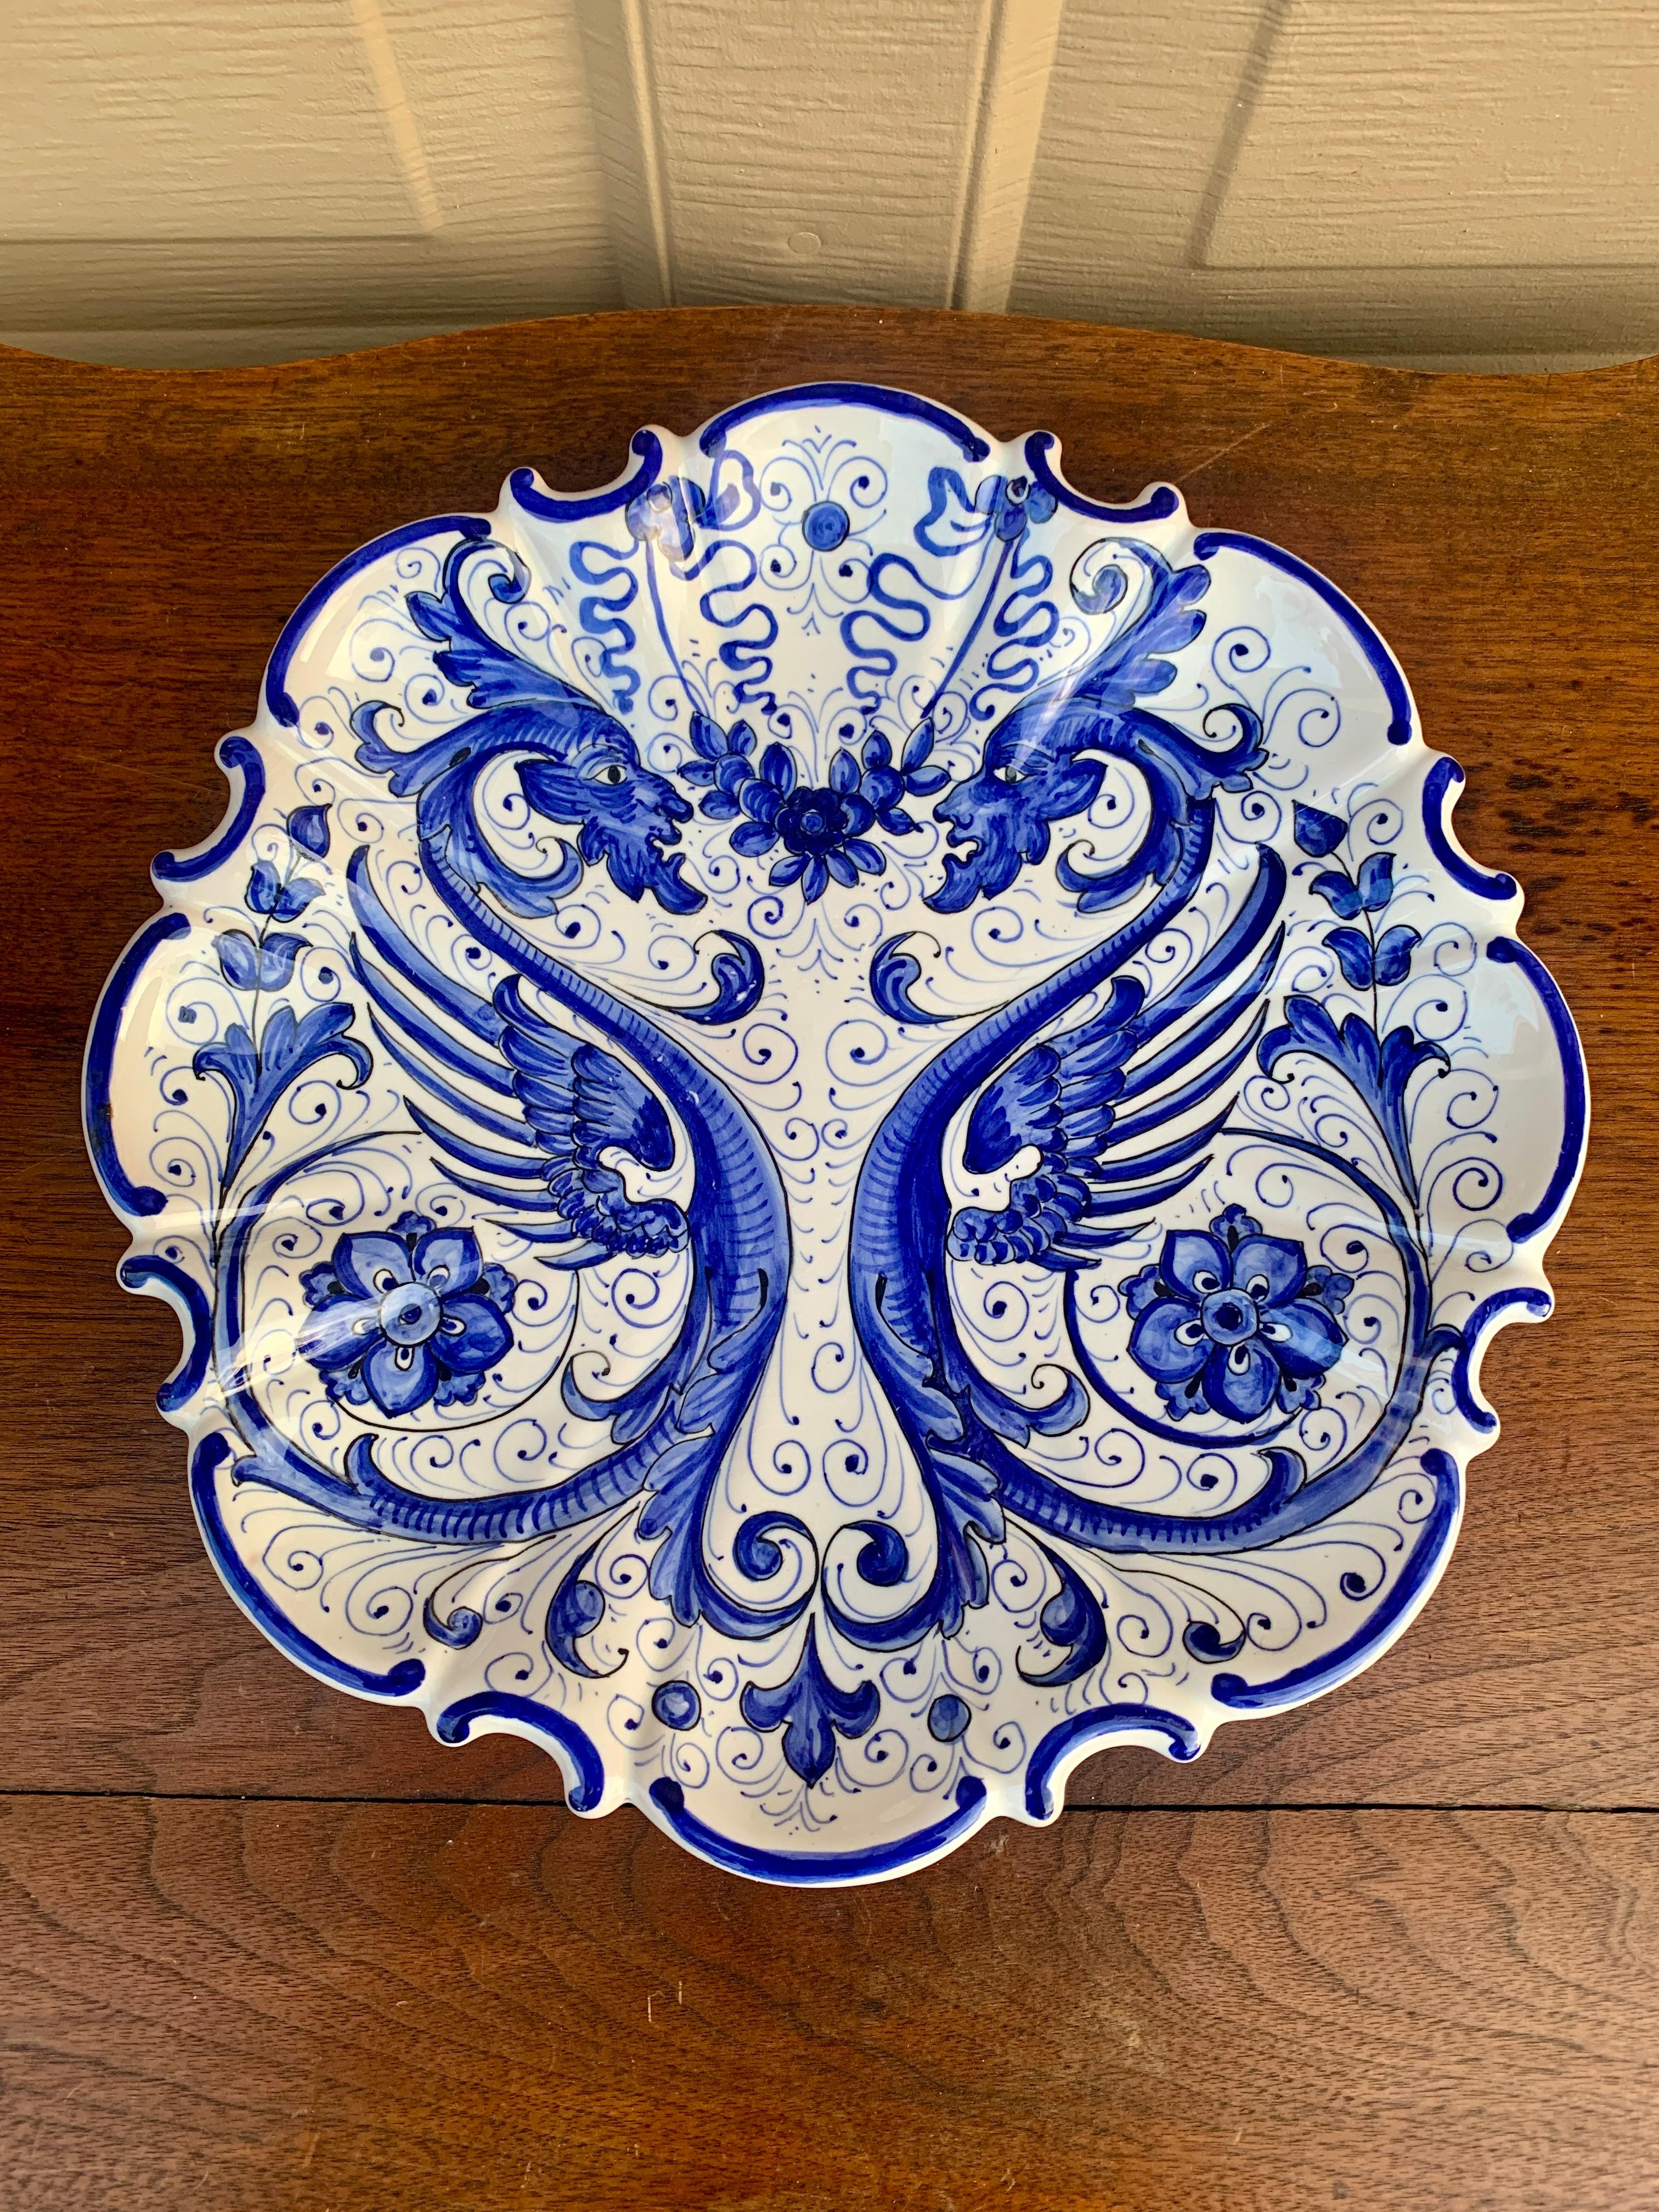 A beautiful French Provincial style hand painted blue and white faience pottery wall plate featuring stylized Allegorical dragons and floral designs.

By Santucci for Deruta

Italy, Late-20th Century

Measures: 10.75